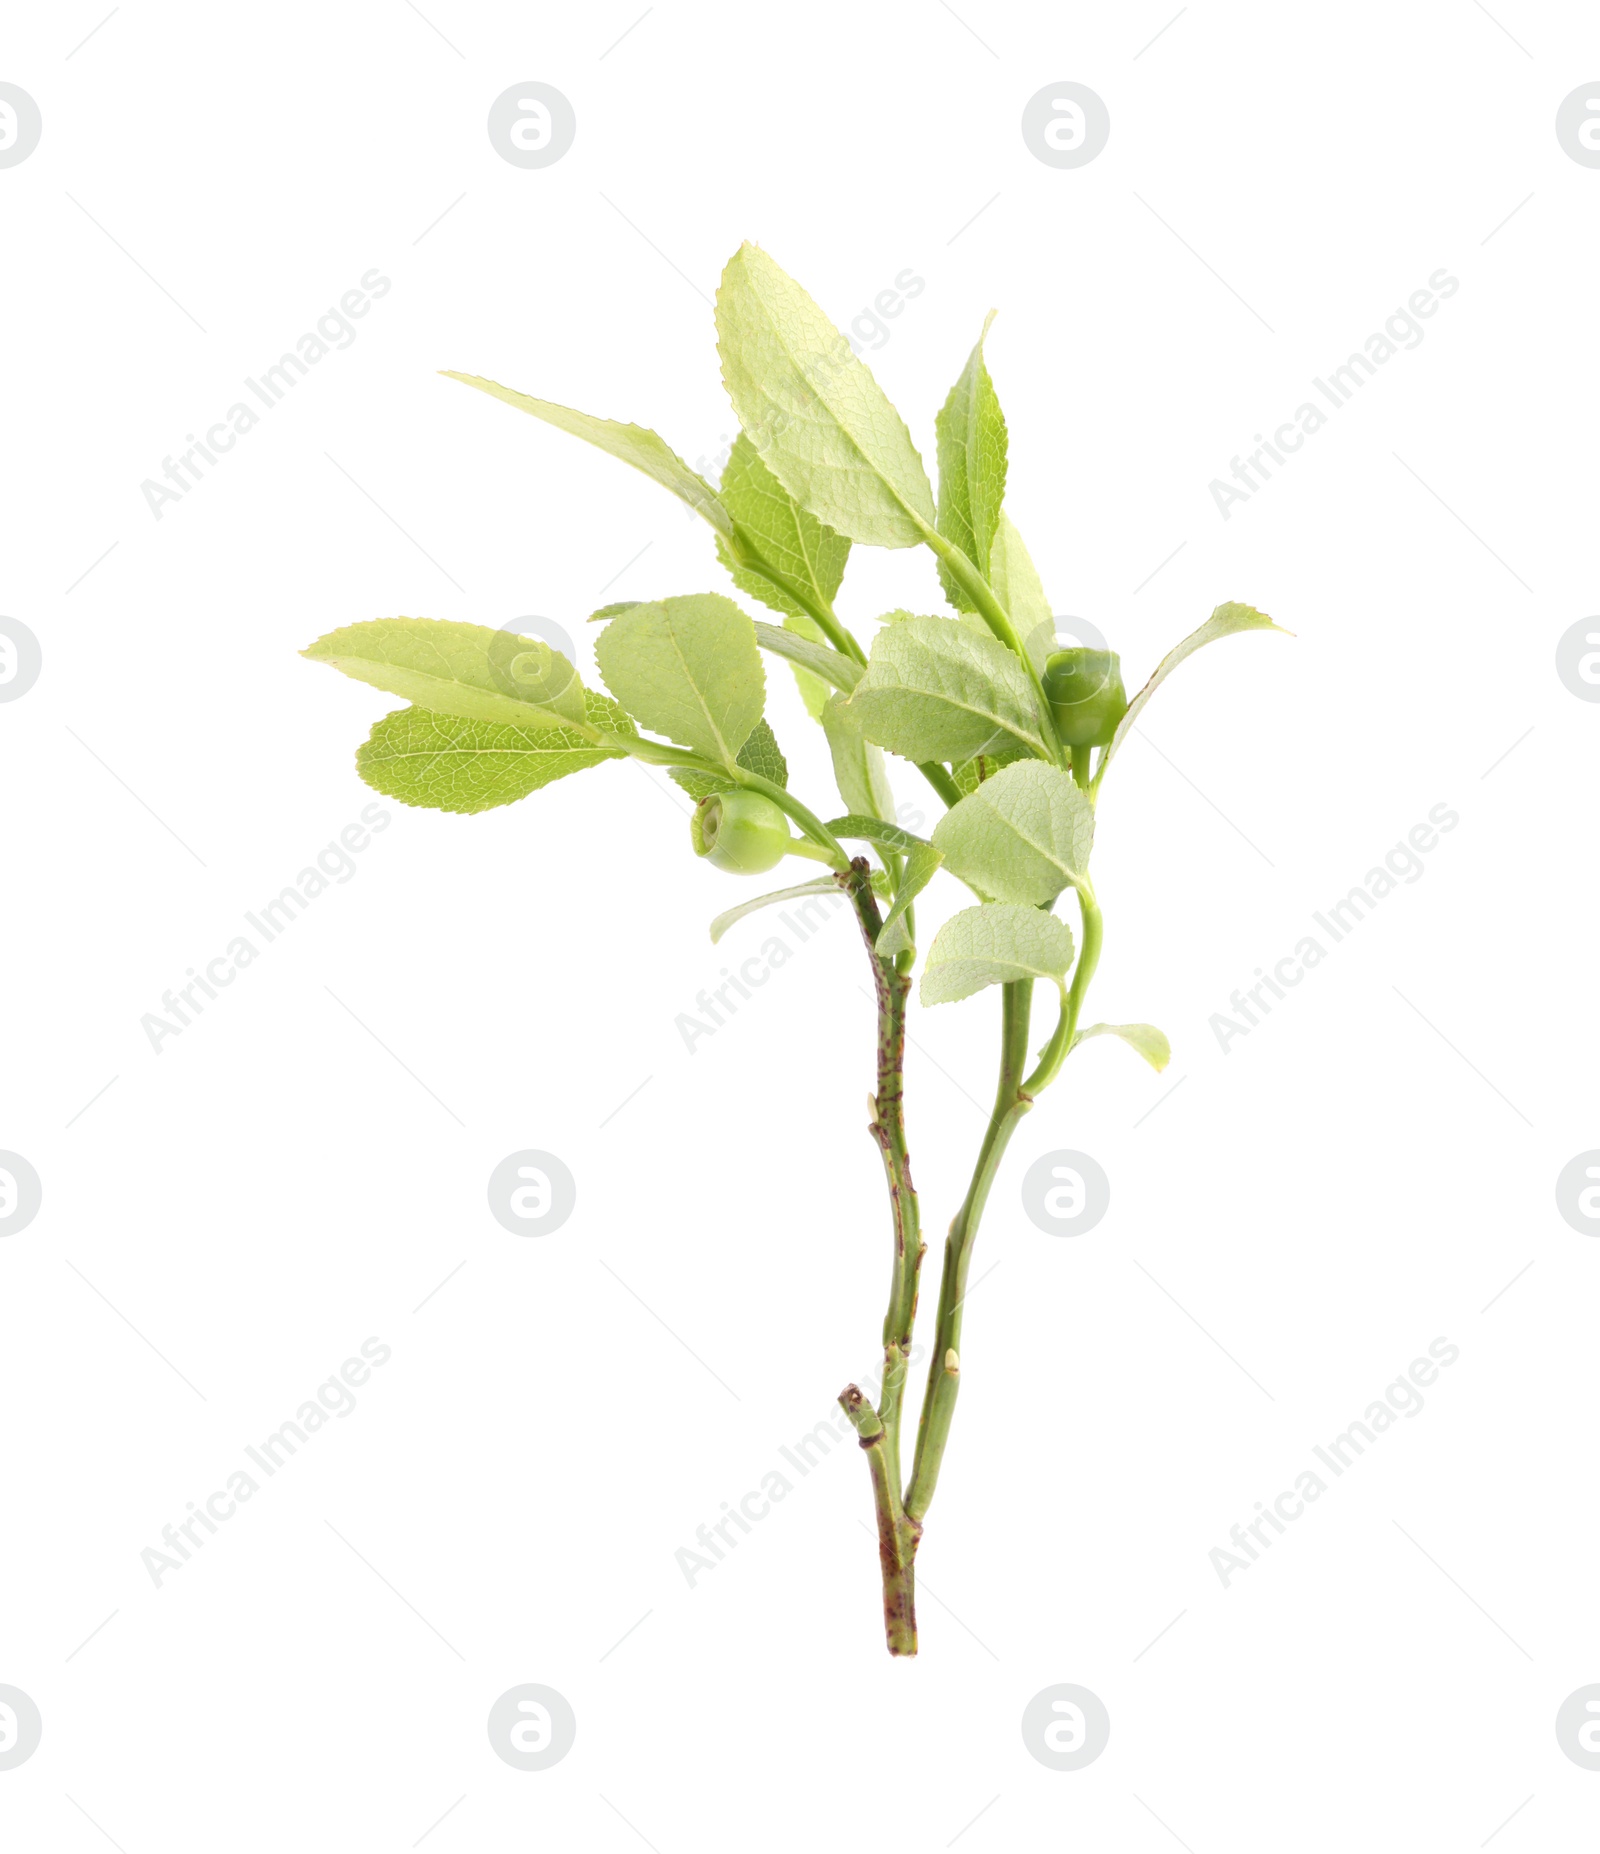 Photo of Bilberry branch with fresh green leaves isolated on white